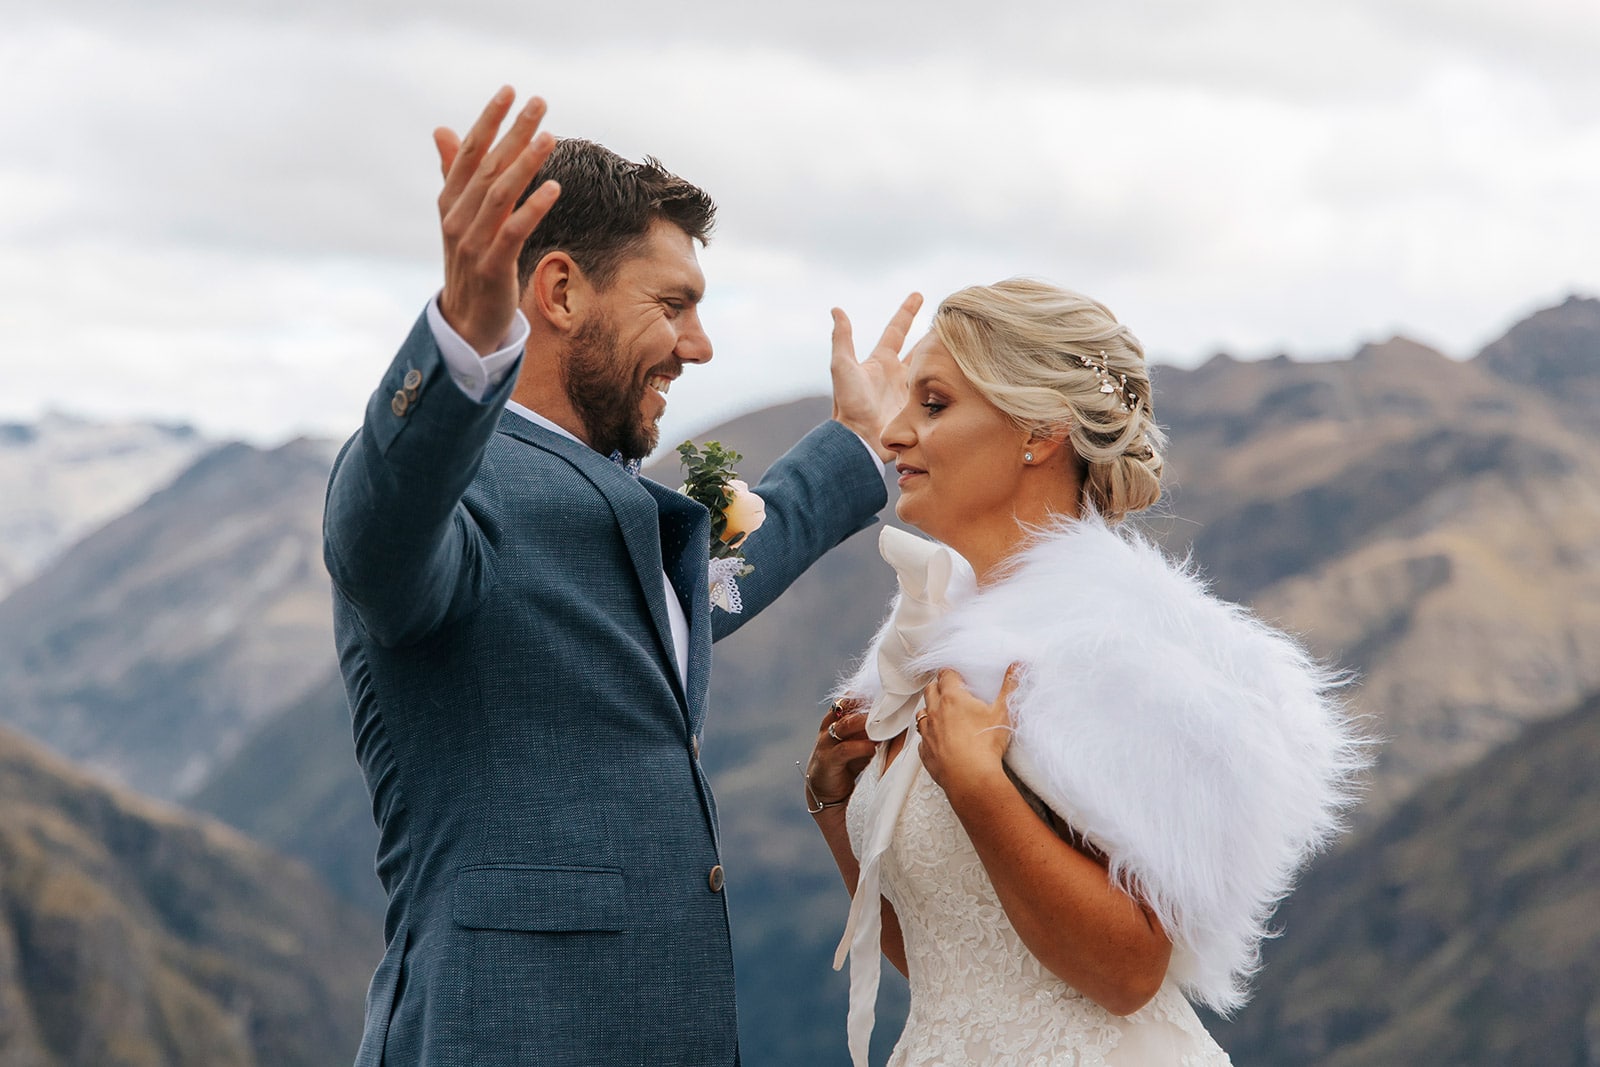 nstown Elopement Destination Wedding by helicopter